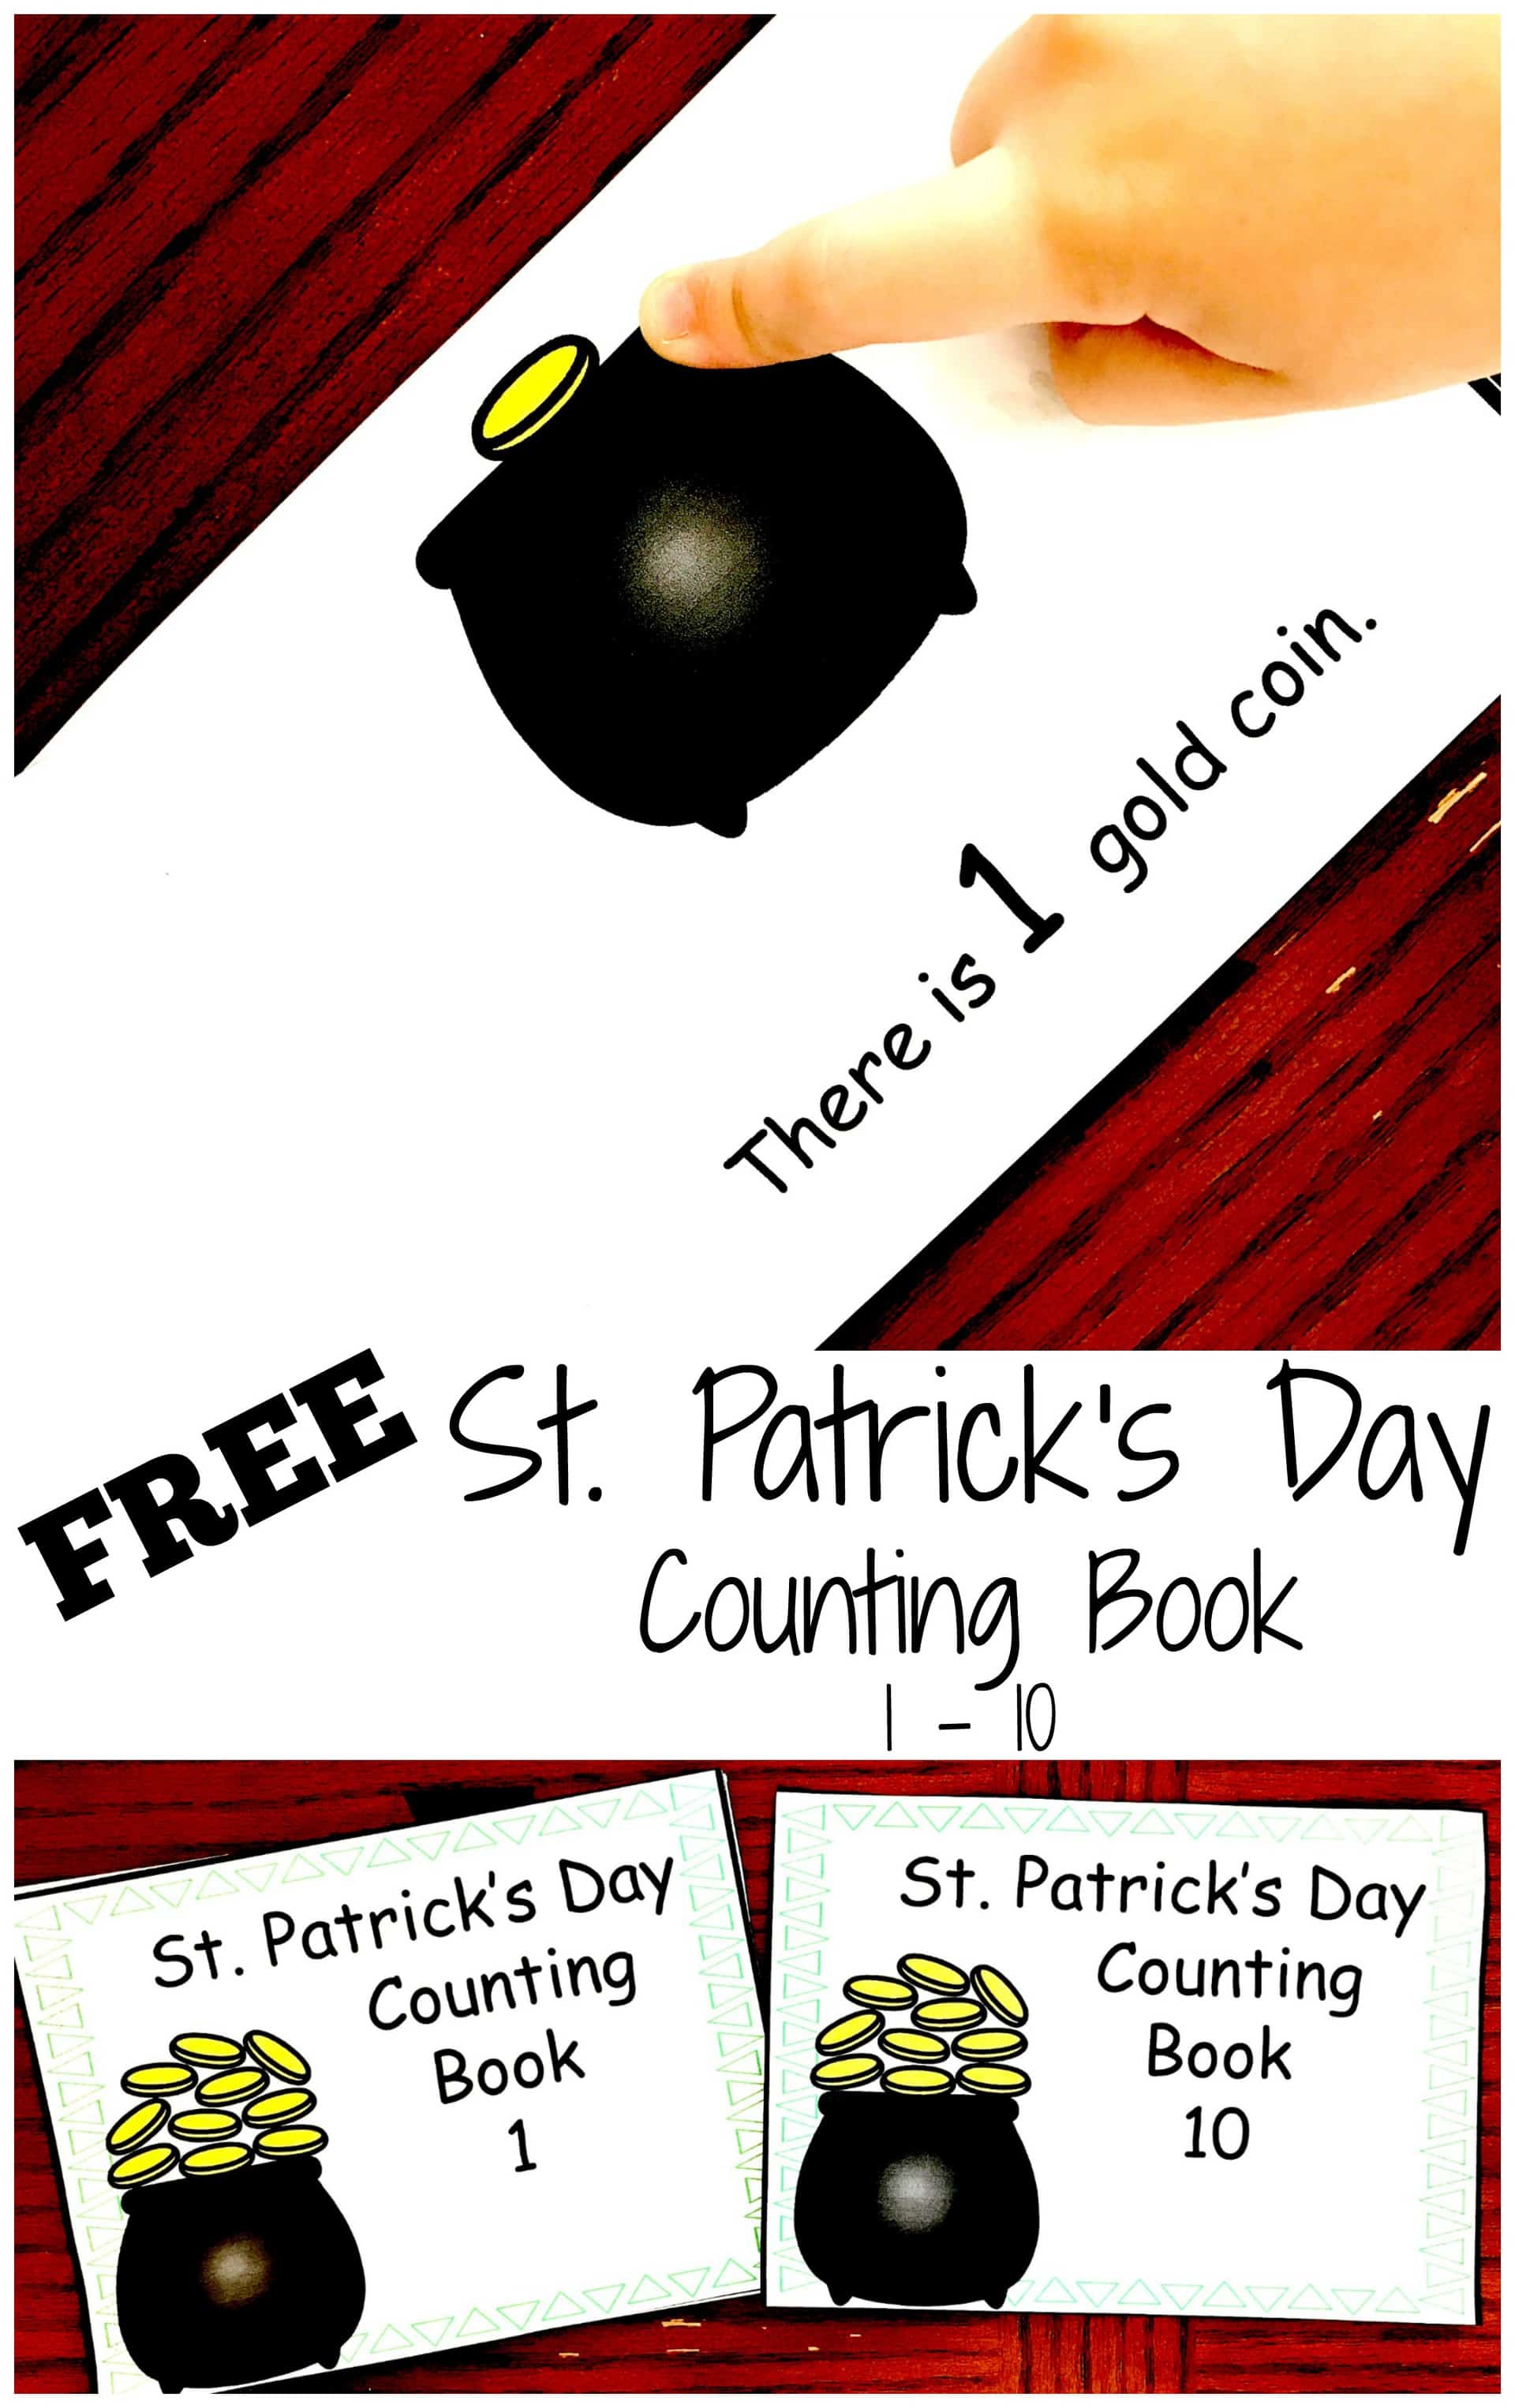 FREE Saint Patrick's Day Counting Books